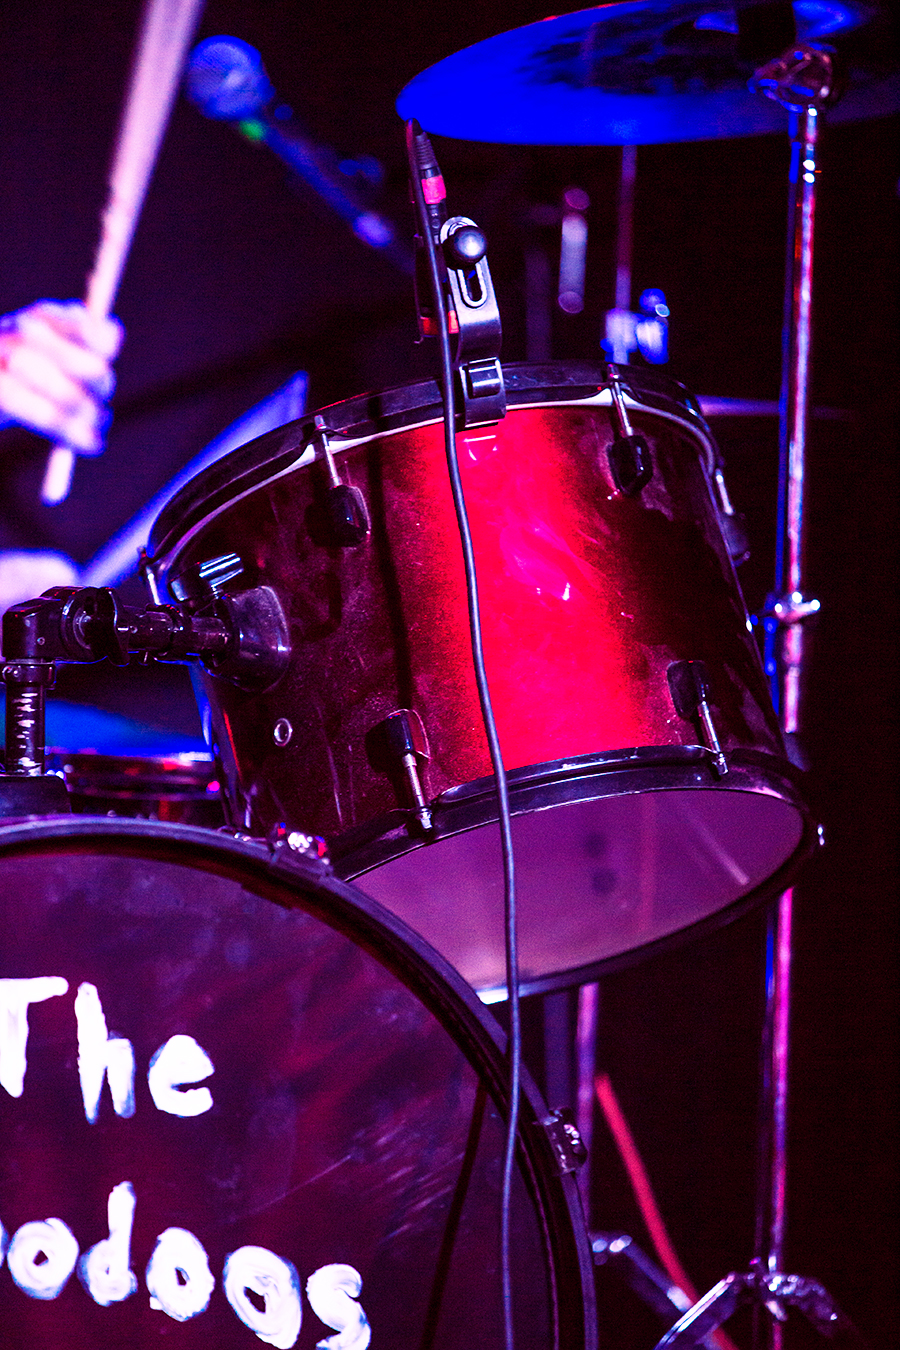 The Hoodoos at The Canal Club - Image Property of www.j-dphoto.com